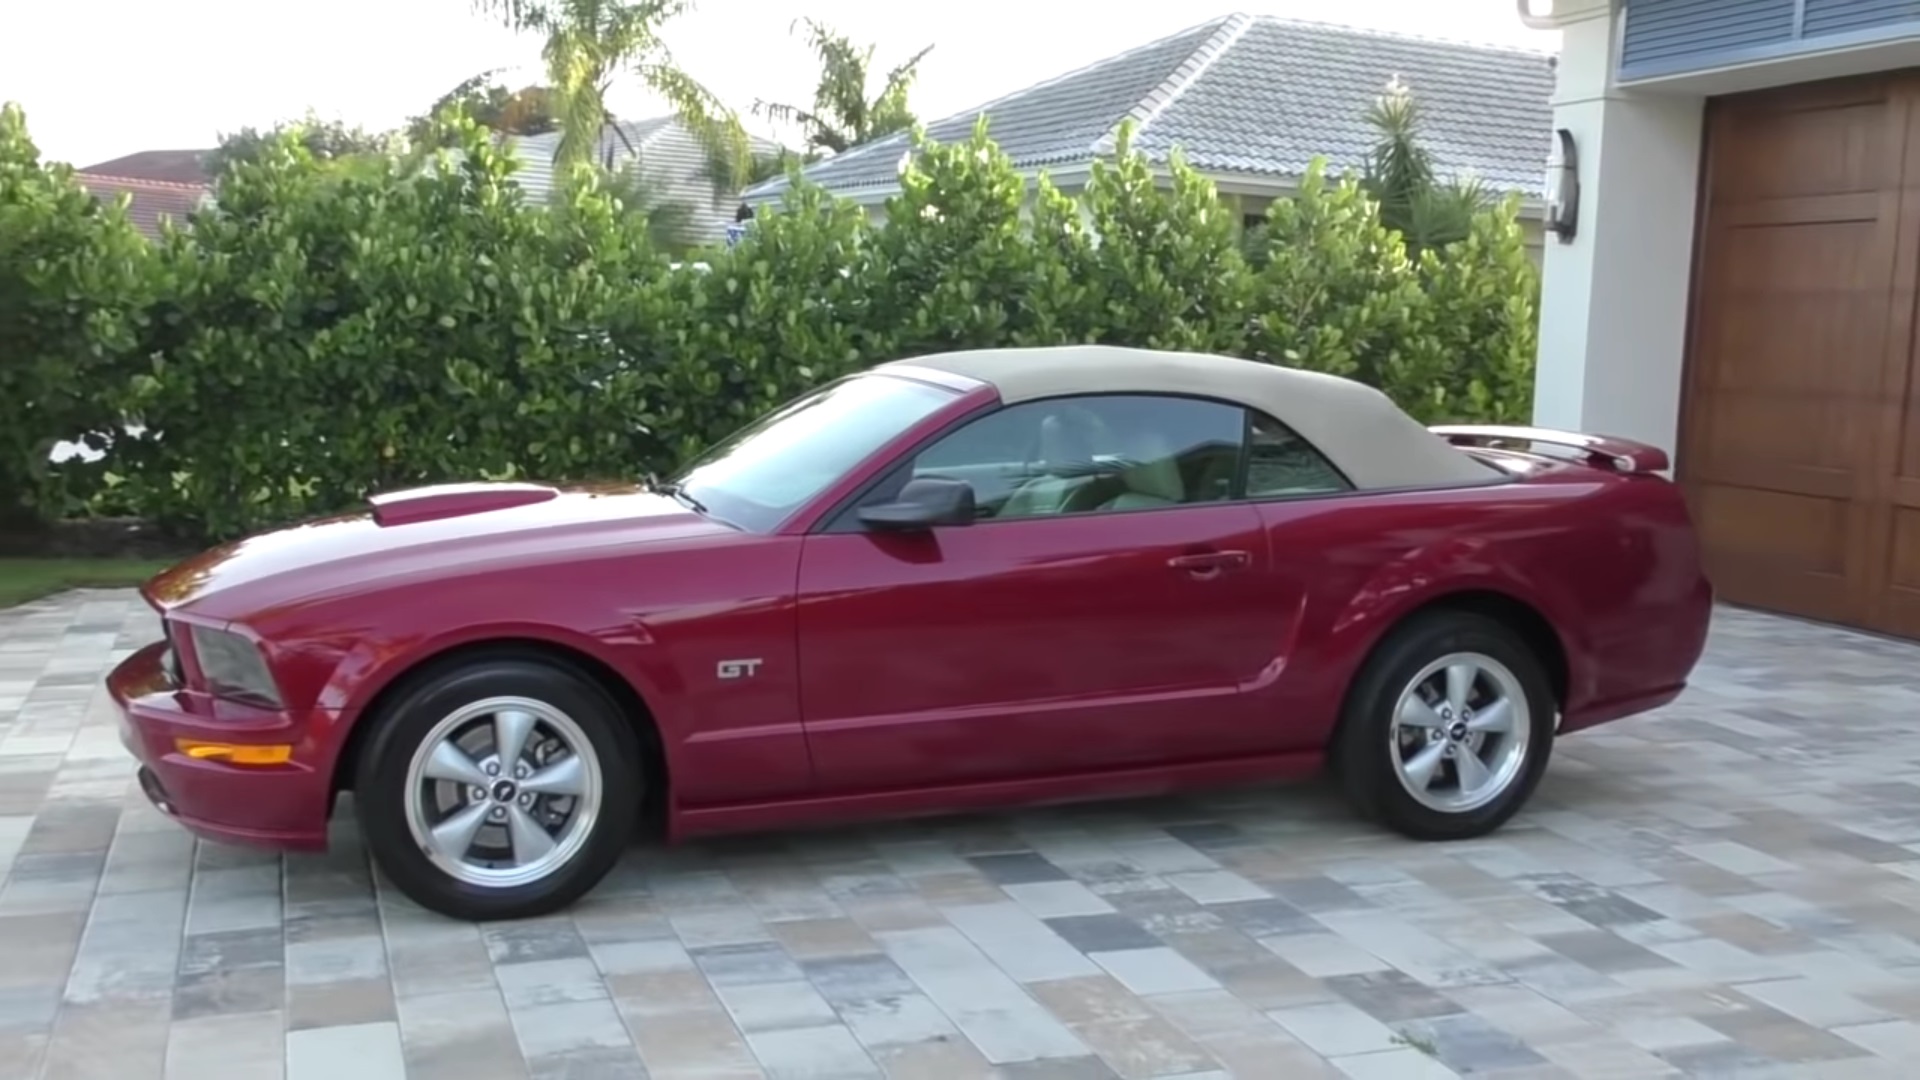 Video: 2008 Ford Mustang GT Premium Convertible Walkaround + Test Drive